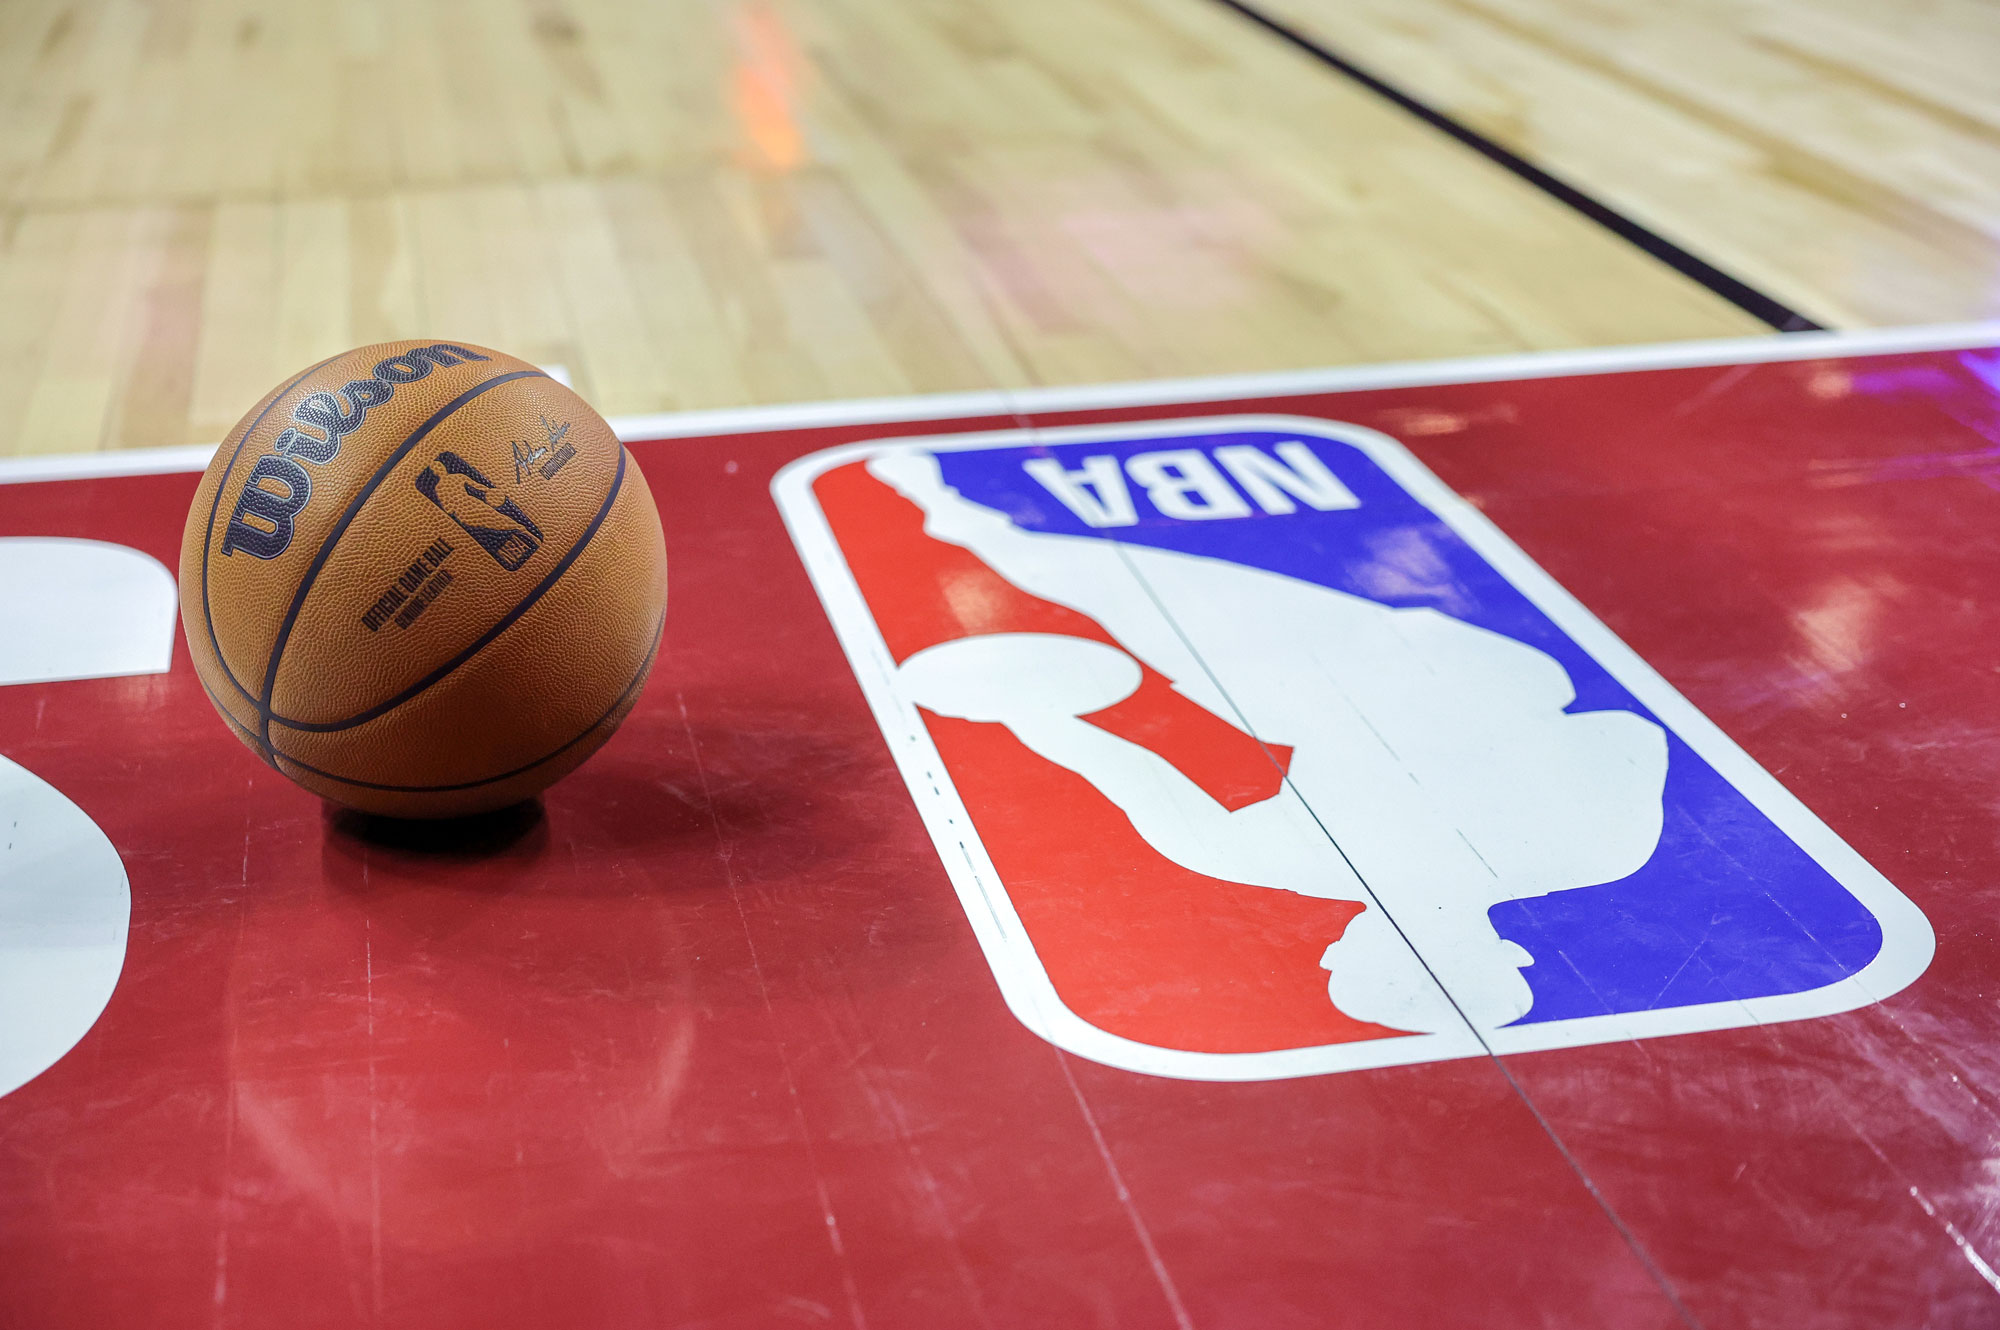 Twitter to Live-Stream NBA Games With Single-Player Camera Feed